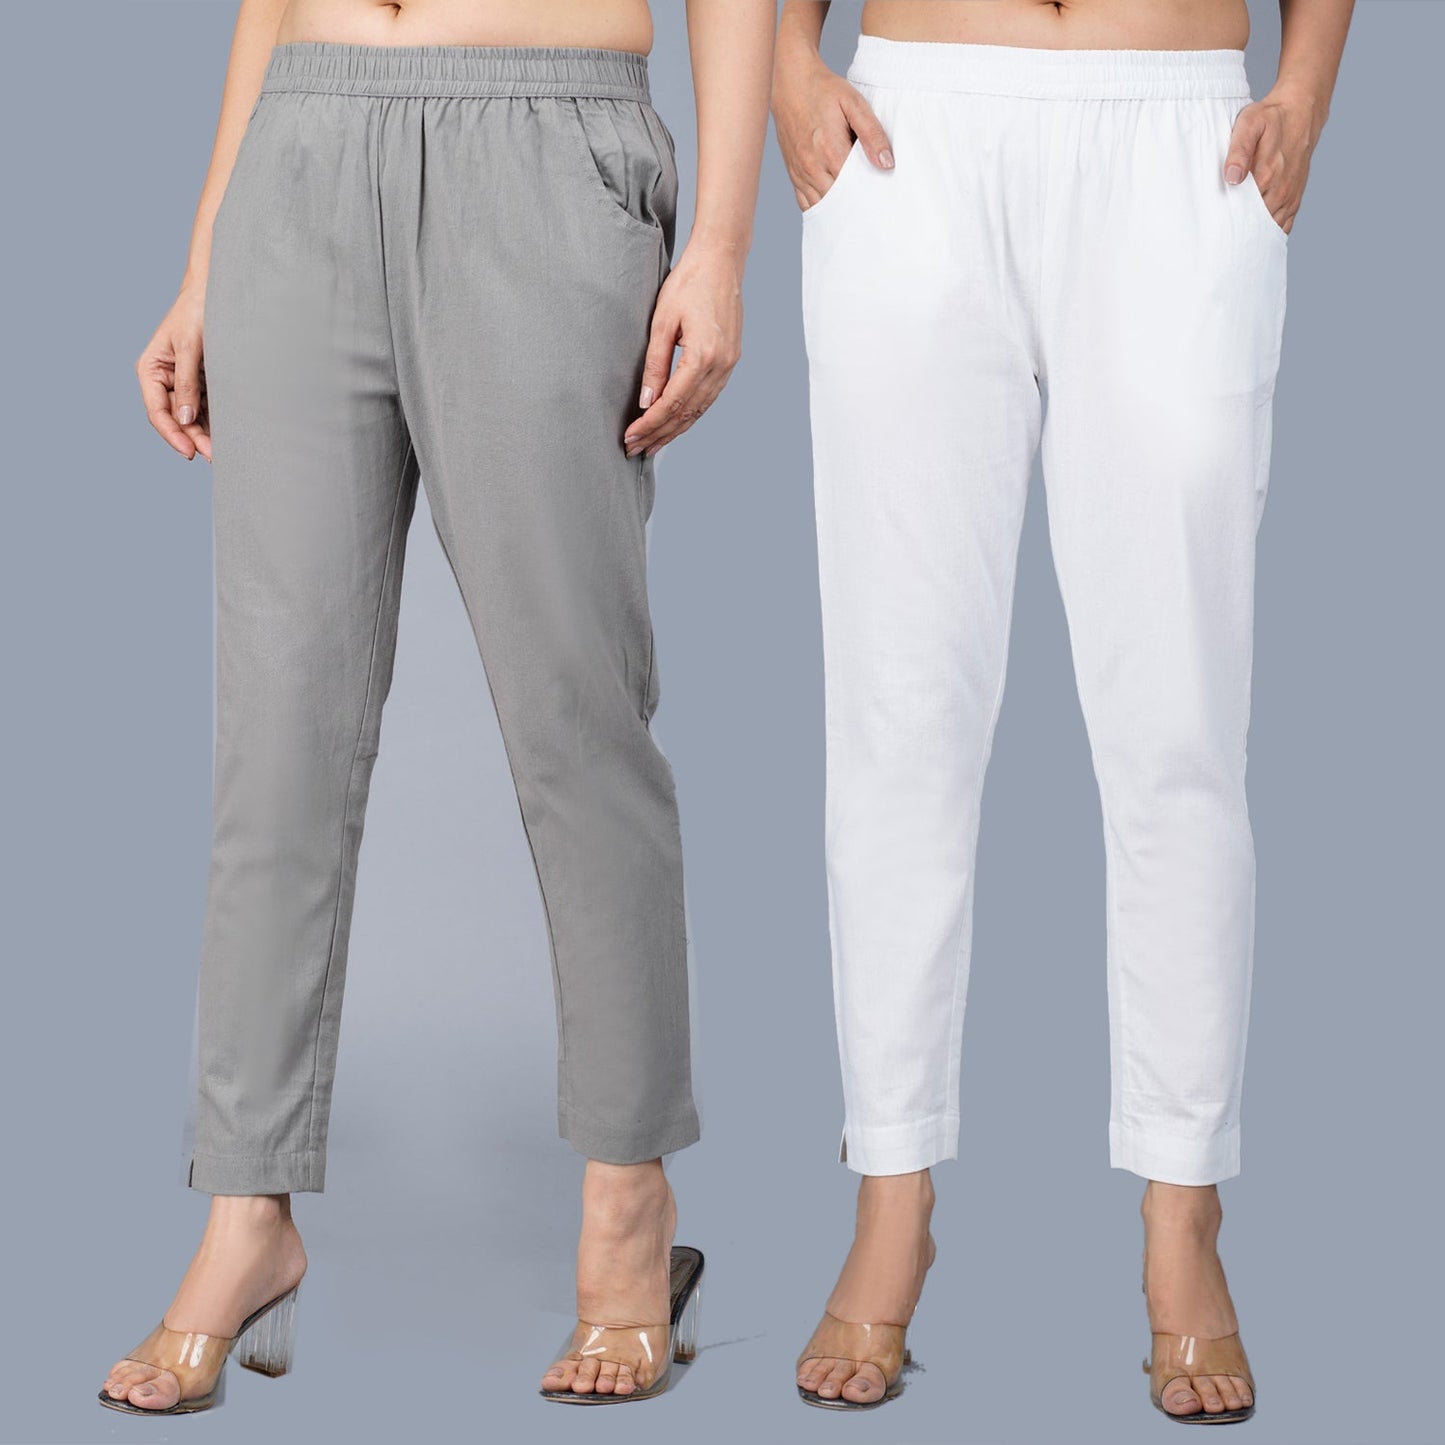 Pack Of 2 Womens Regular Fit Grey And White Fully Elastic Waistband Cotton Trouser